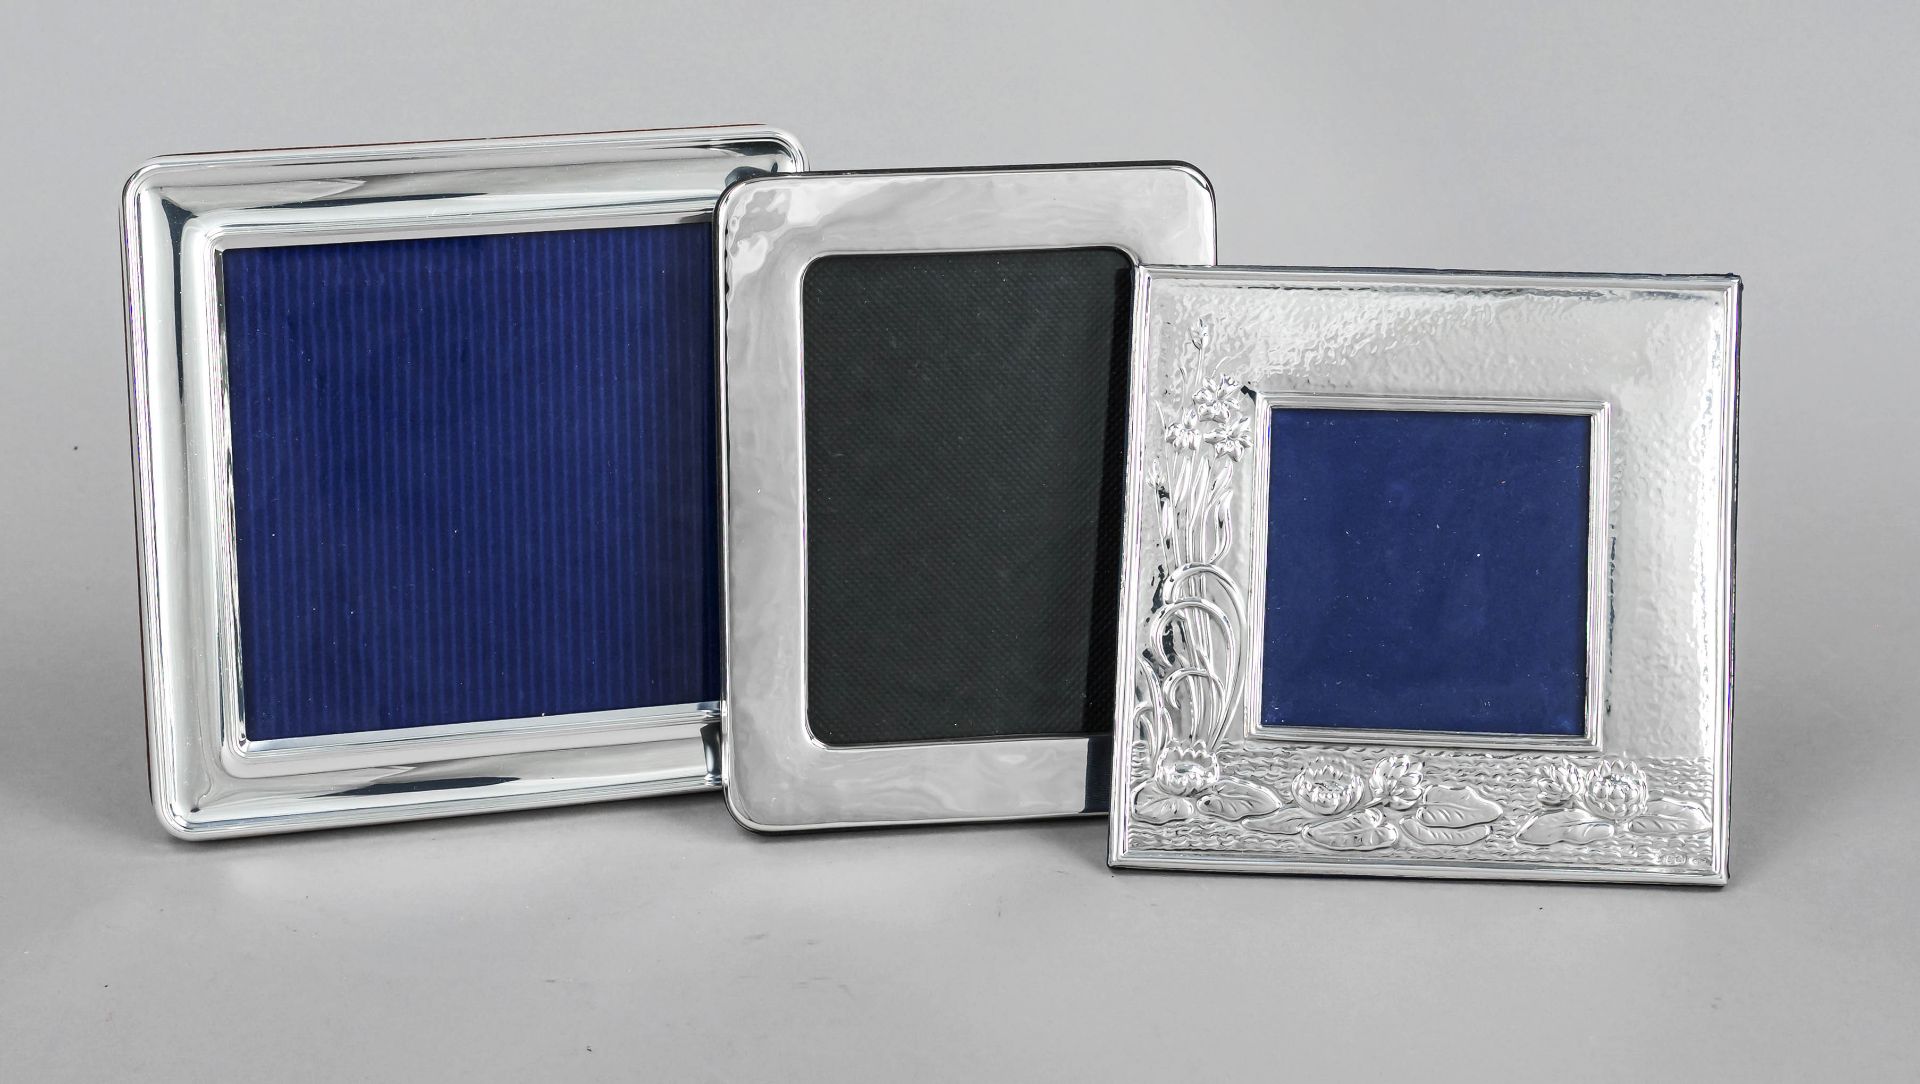 Three photo stand frames, 20th century, sterling silver 925/000, different shapes and sizes, overall